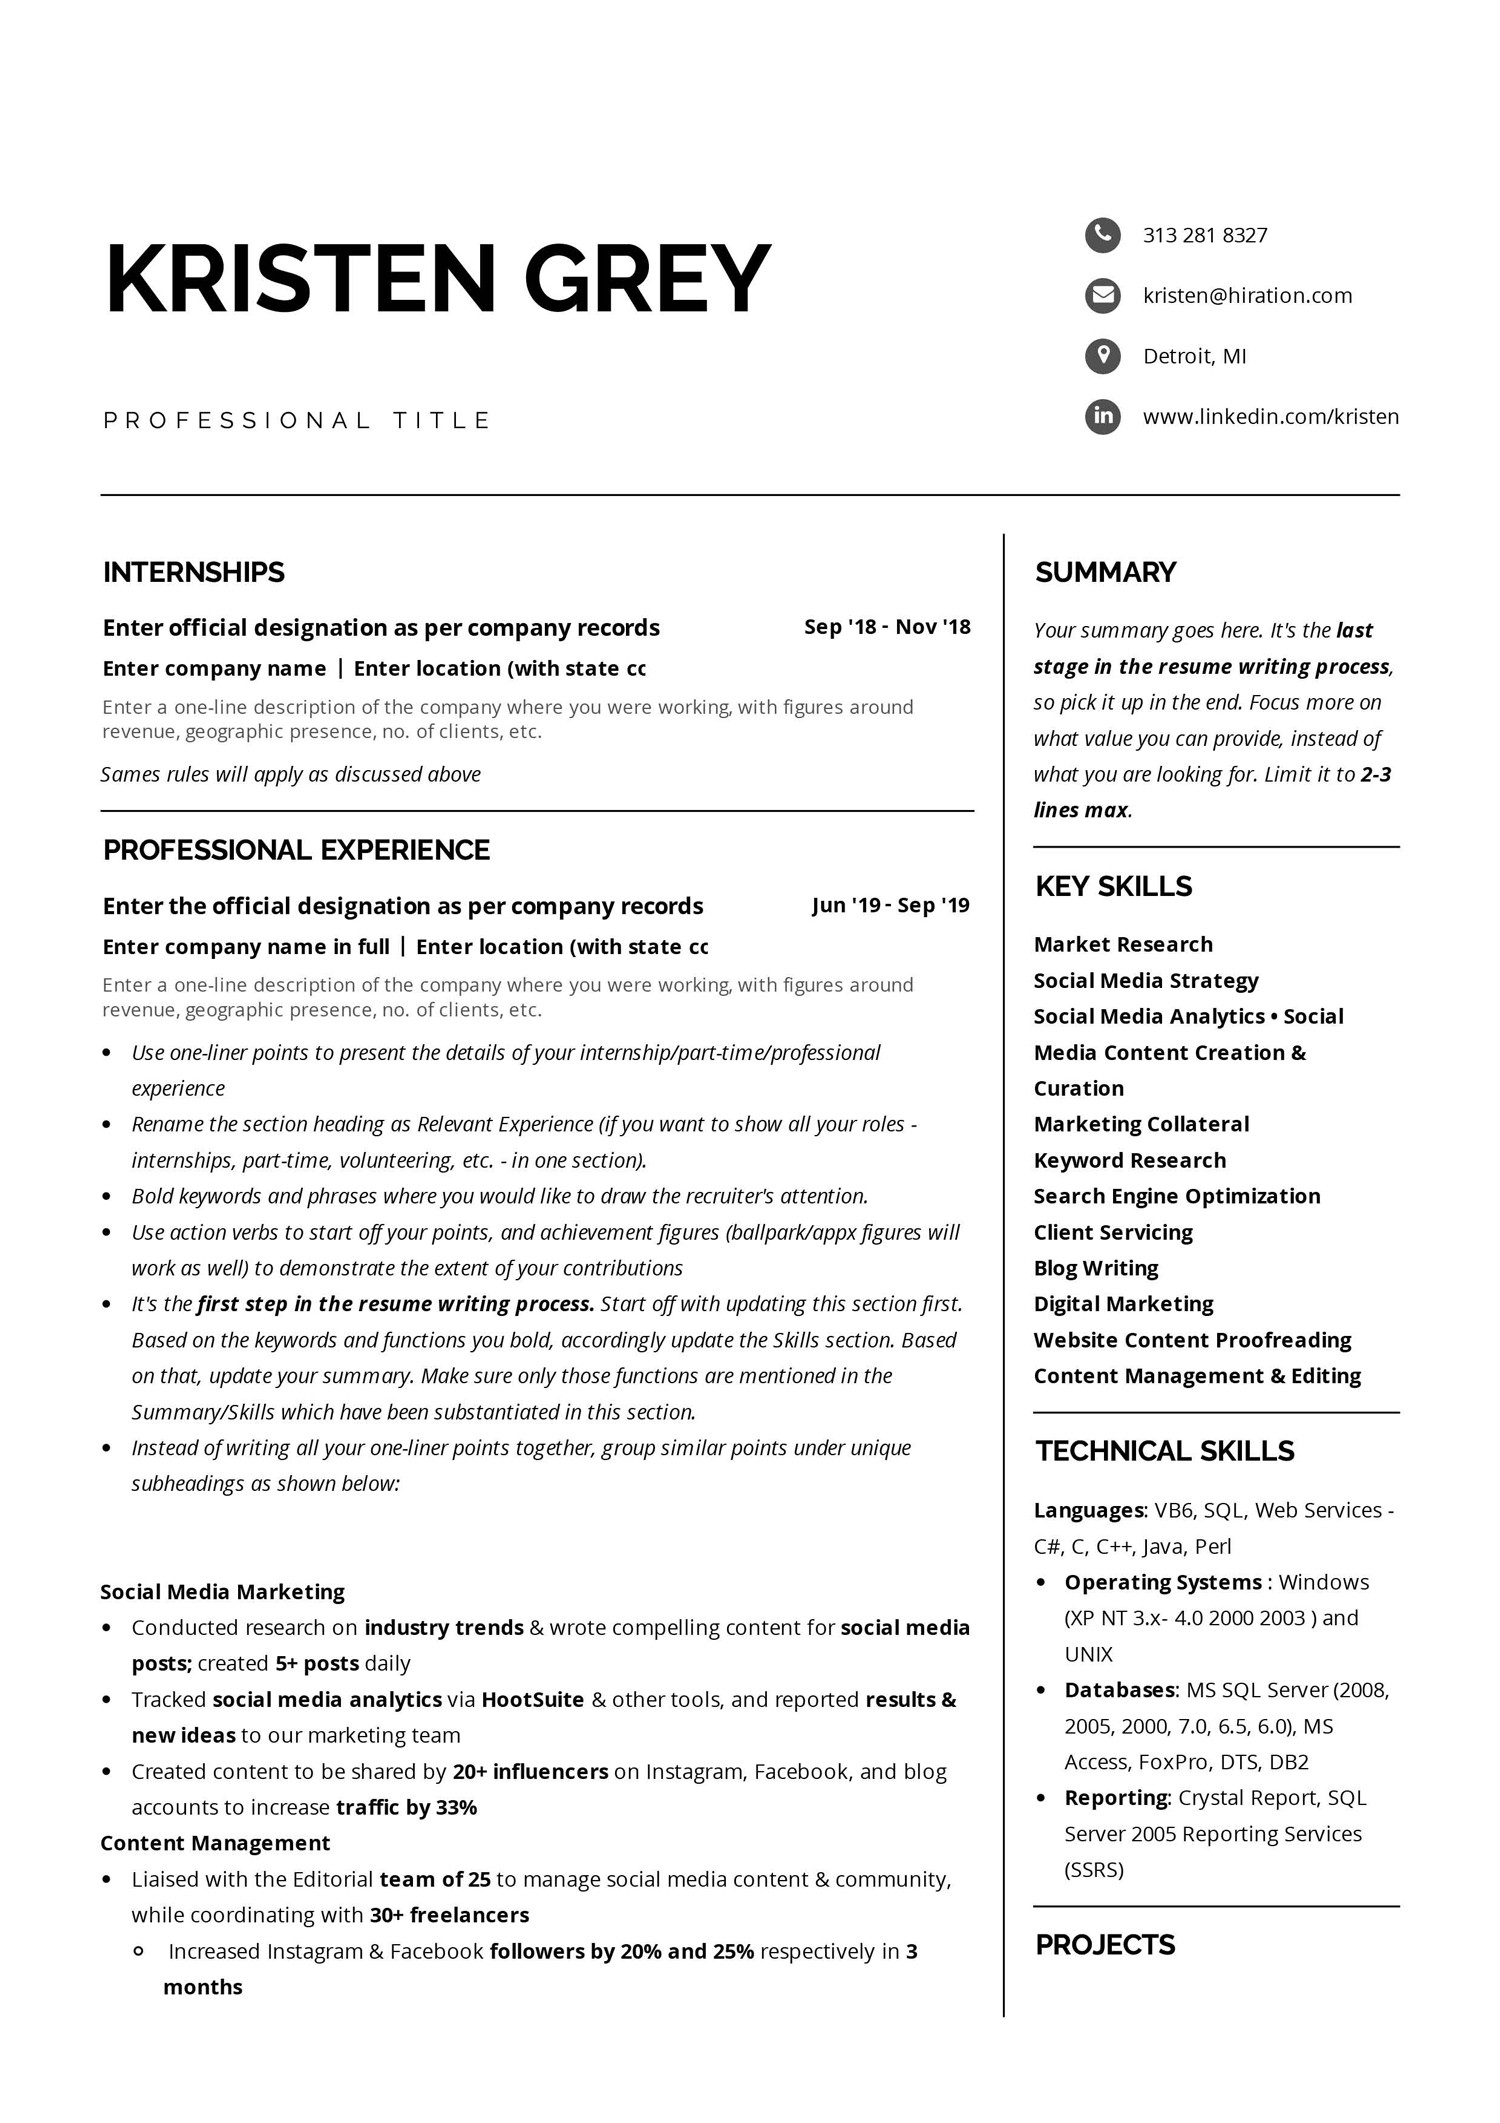 Entry Level Nuclear Medicine Technologist Sample Resume Best Free Resume Templates with Examples [2020]